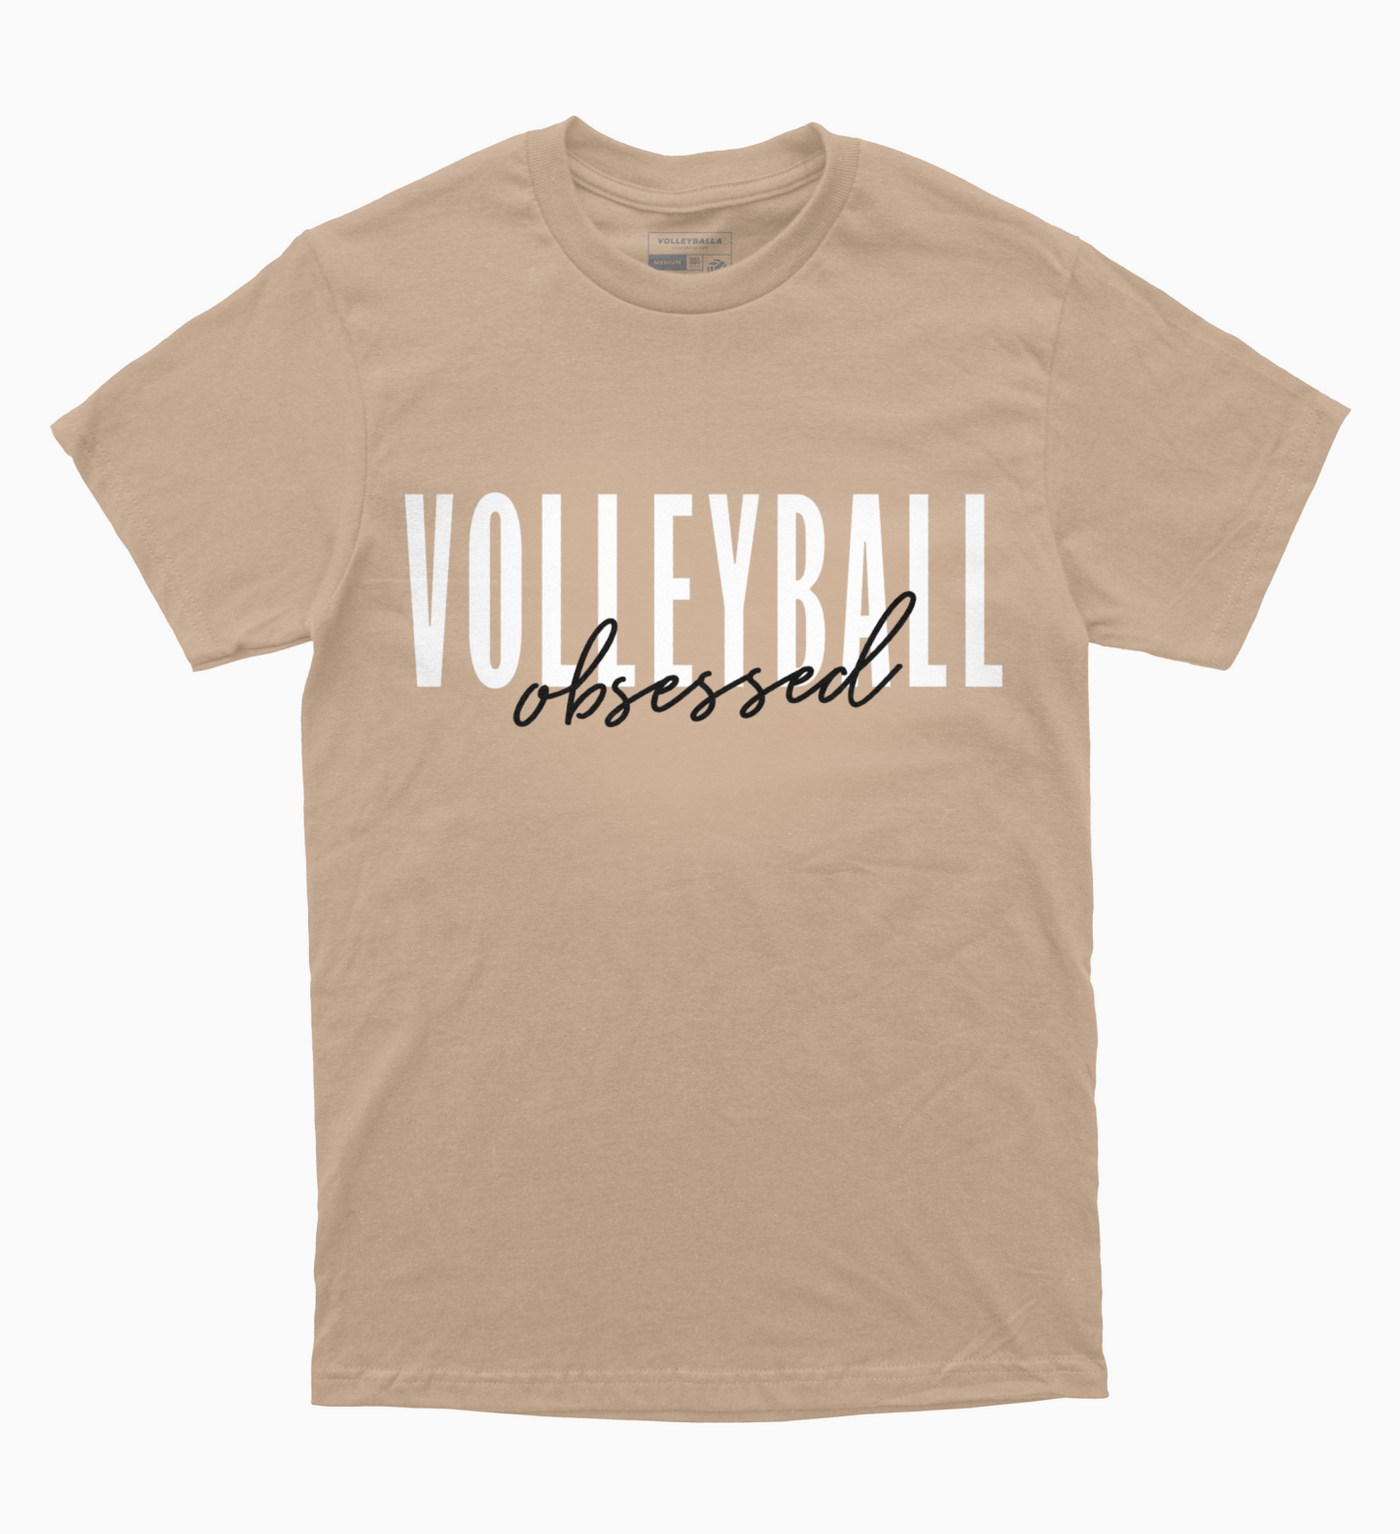 Volleyball Obsessed T-Shirt